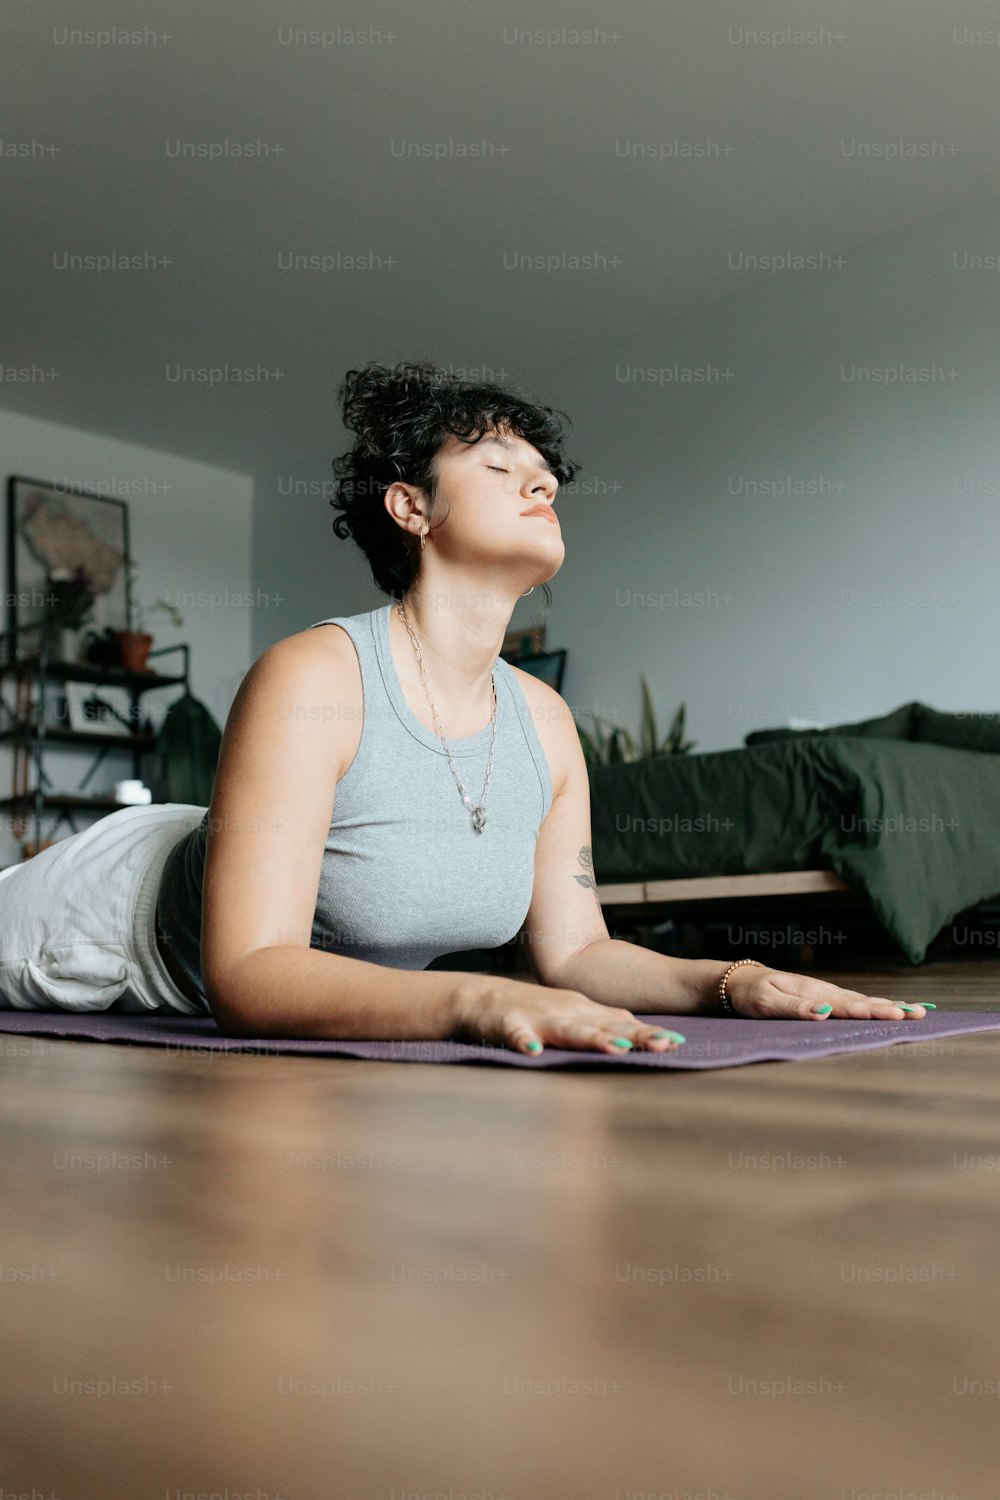 a woman sitting on a yoga mat in the middle of a room